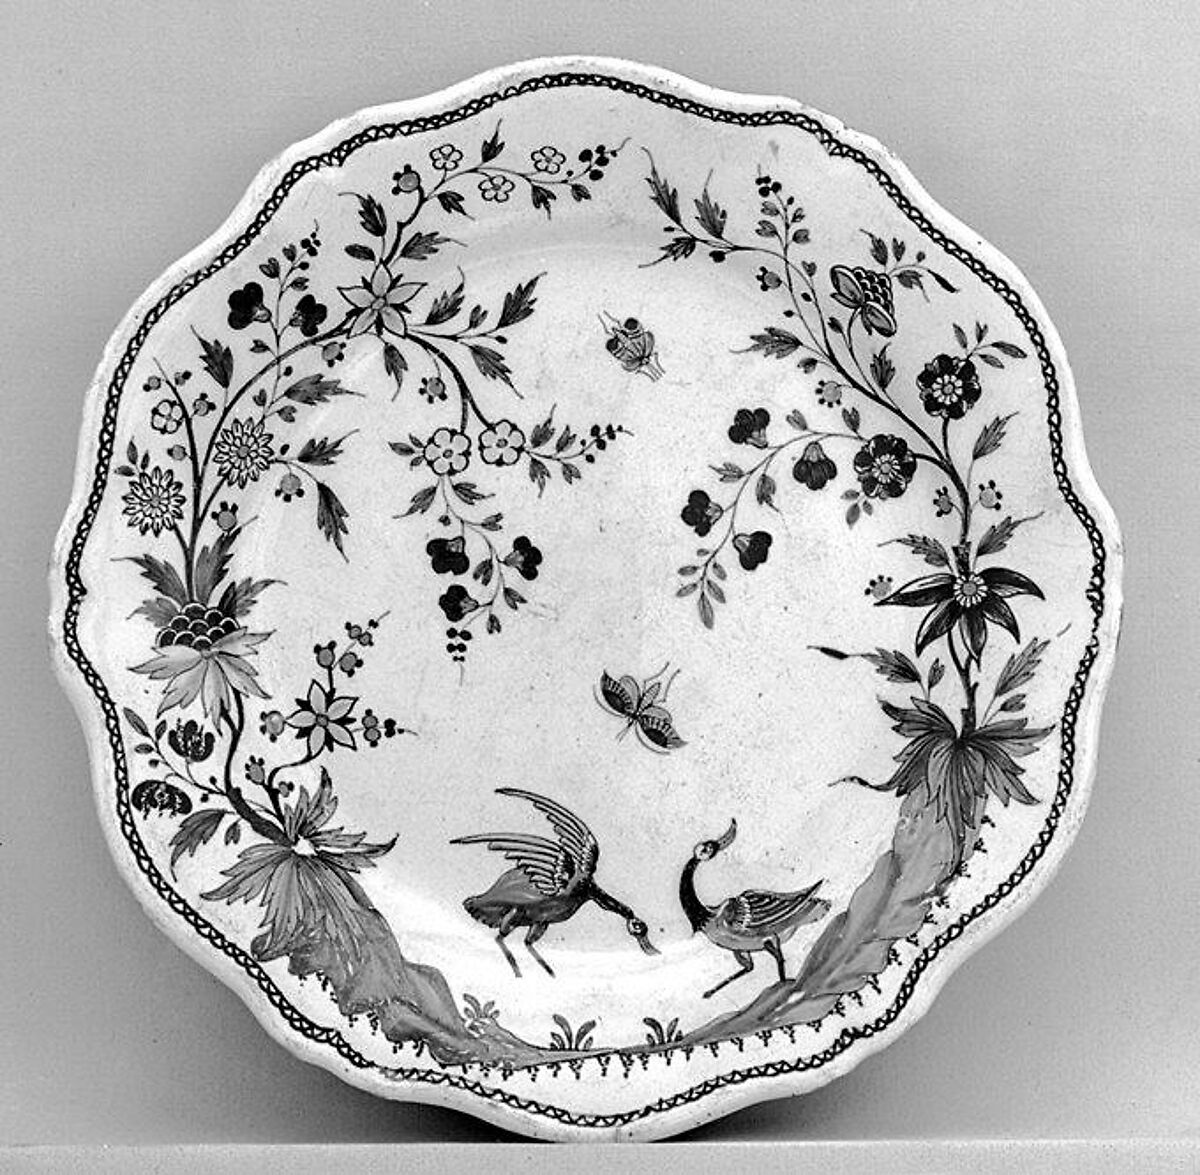 Plate, Faience (tin-glazed earthenware), French, Rouen or possibly Sinceny 